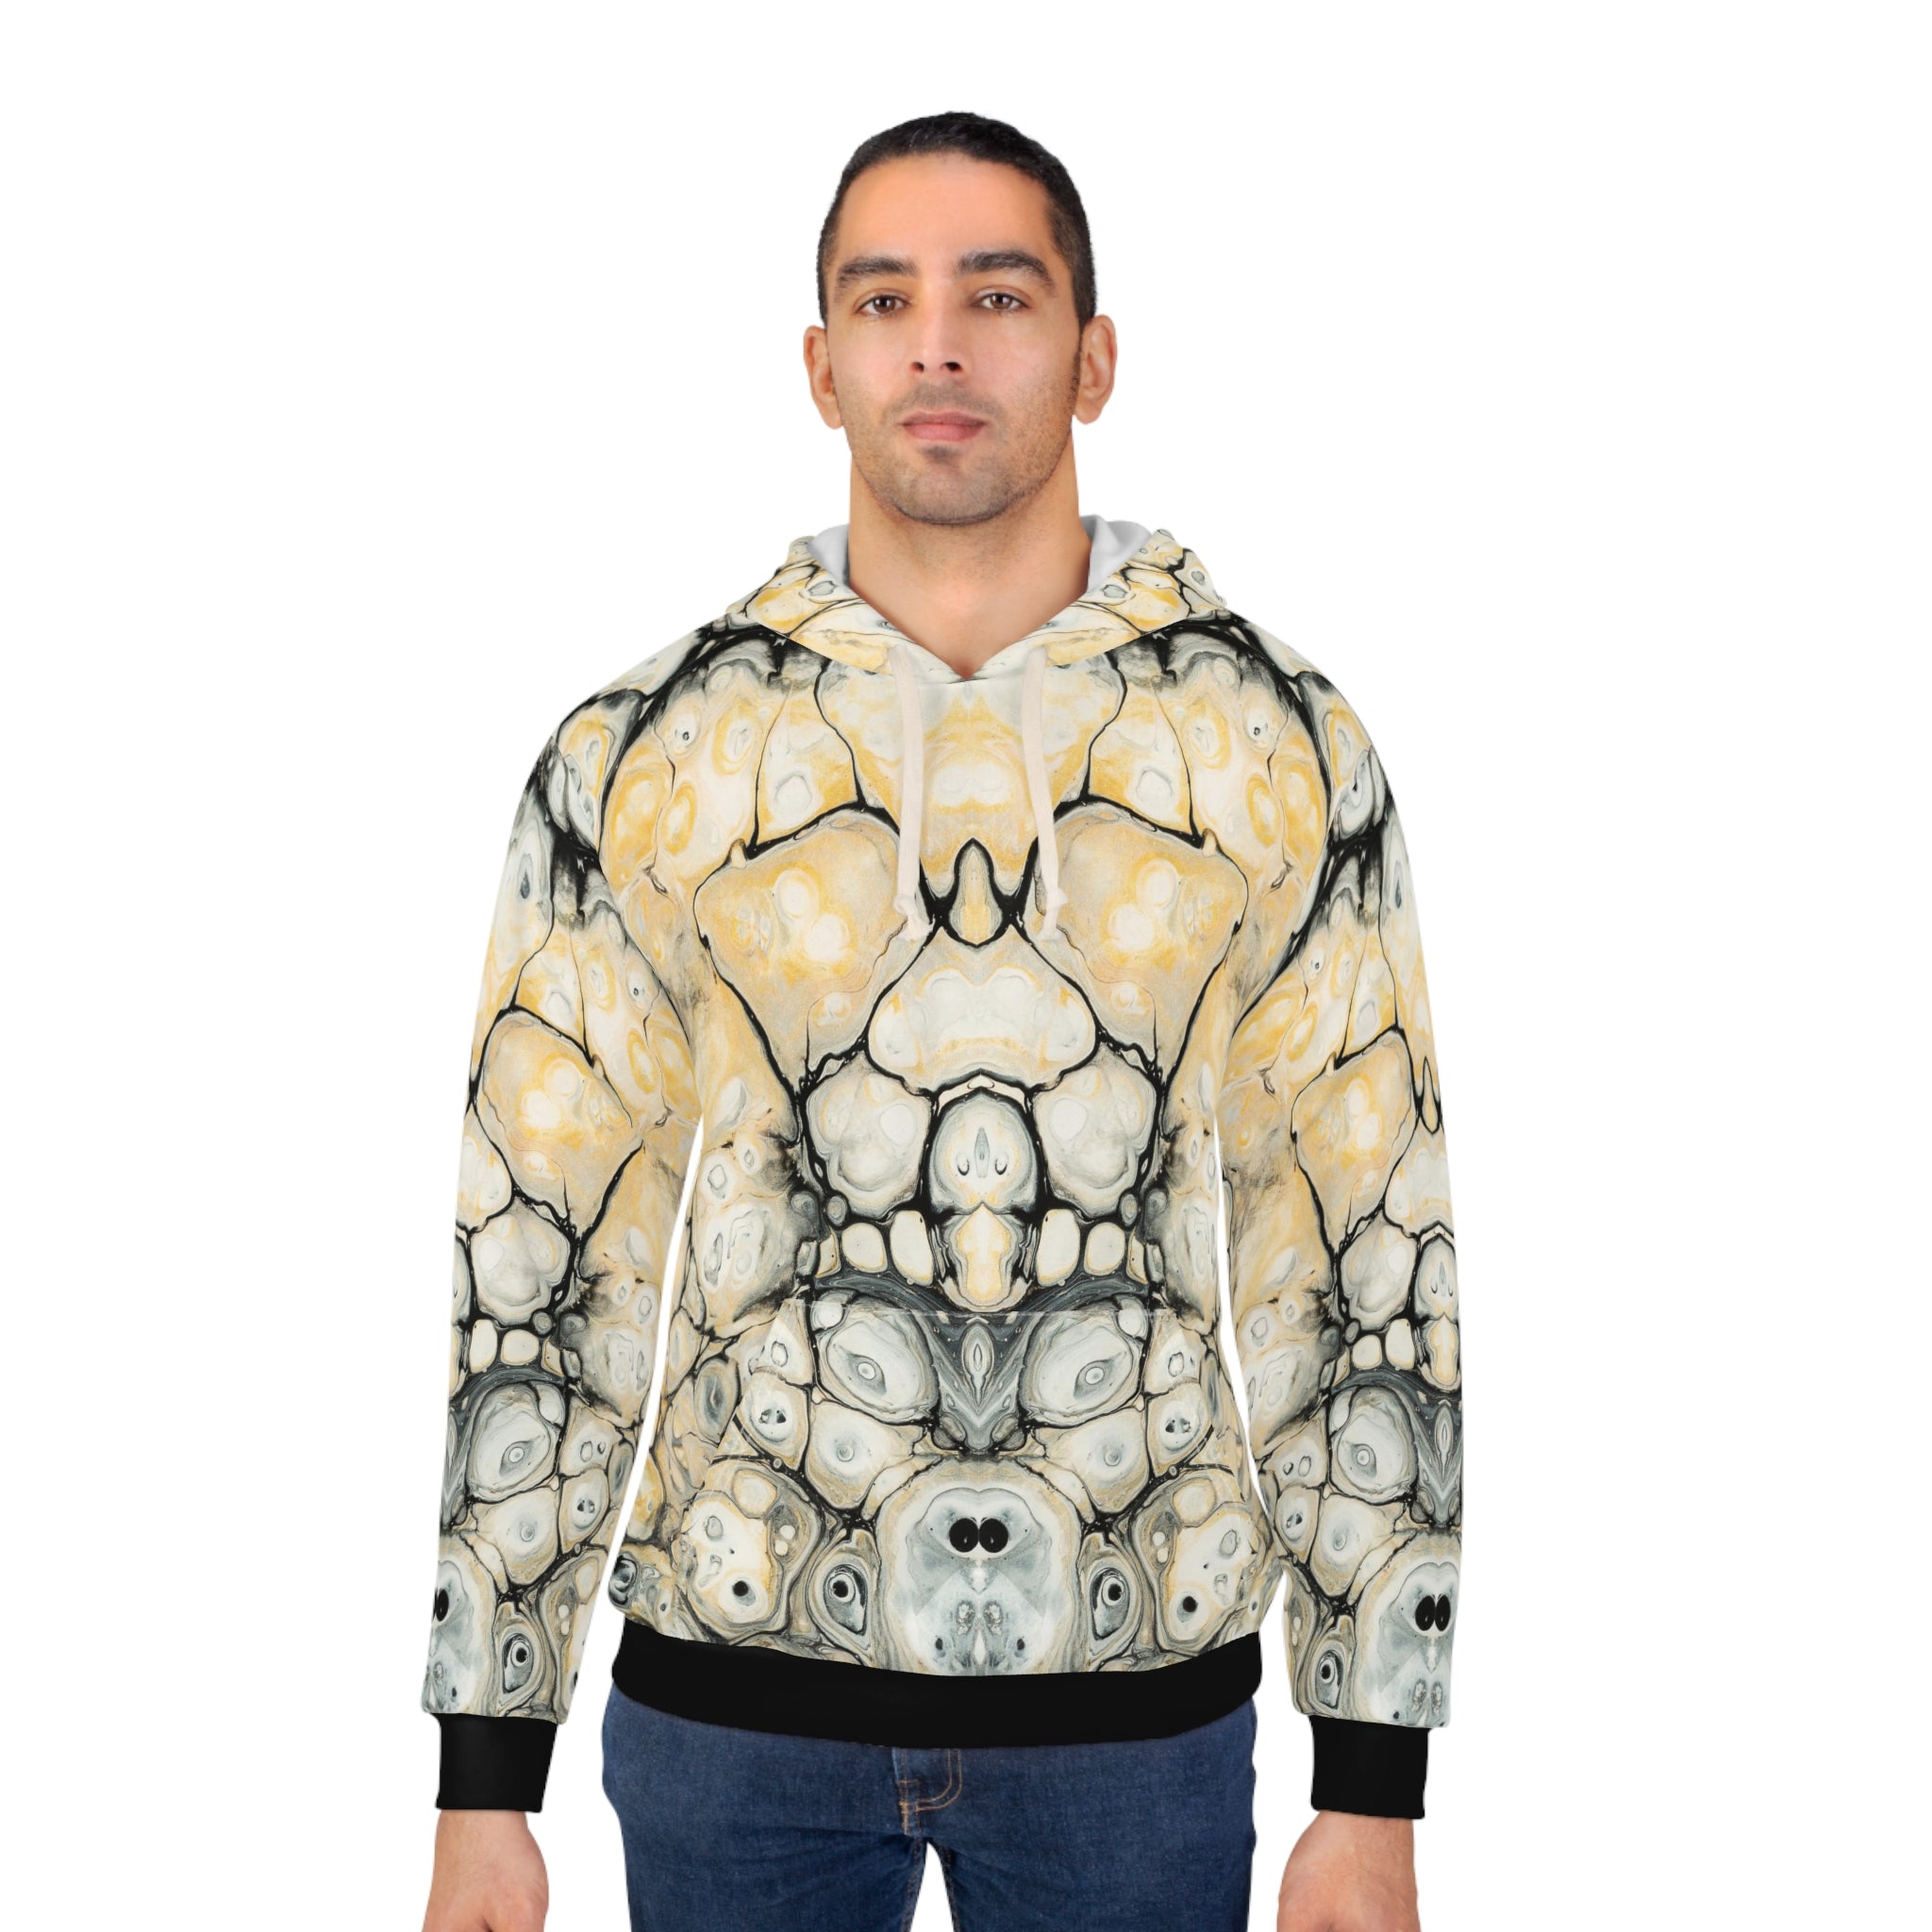 Cameron Creations - Moon Of Panos - Pullover Hoodie - Male